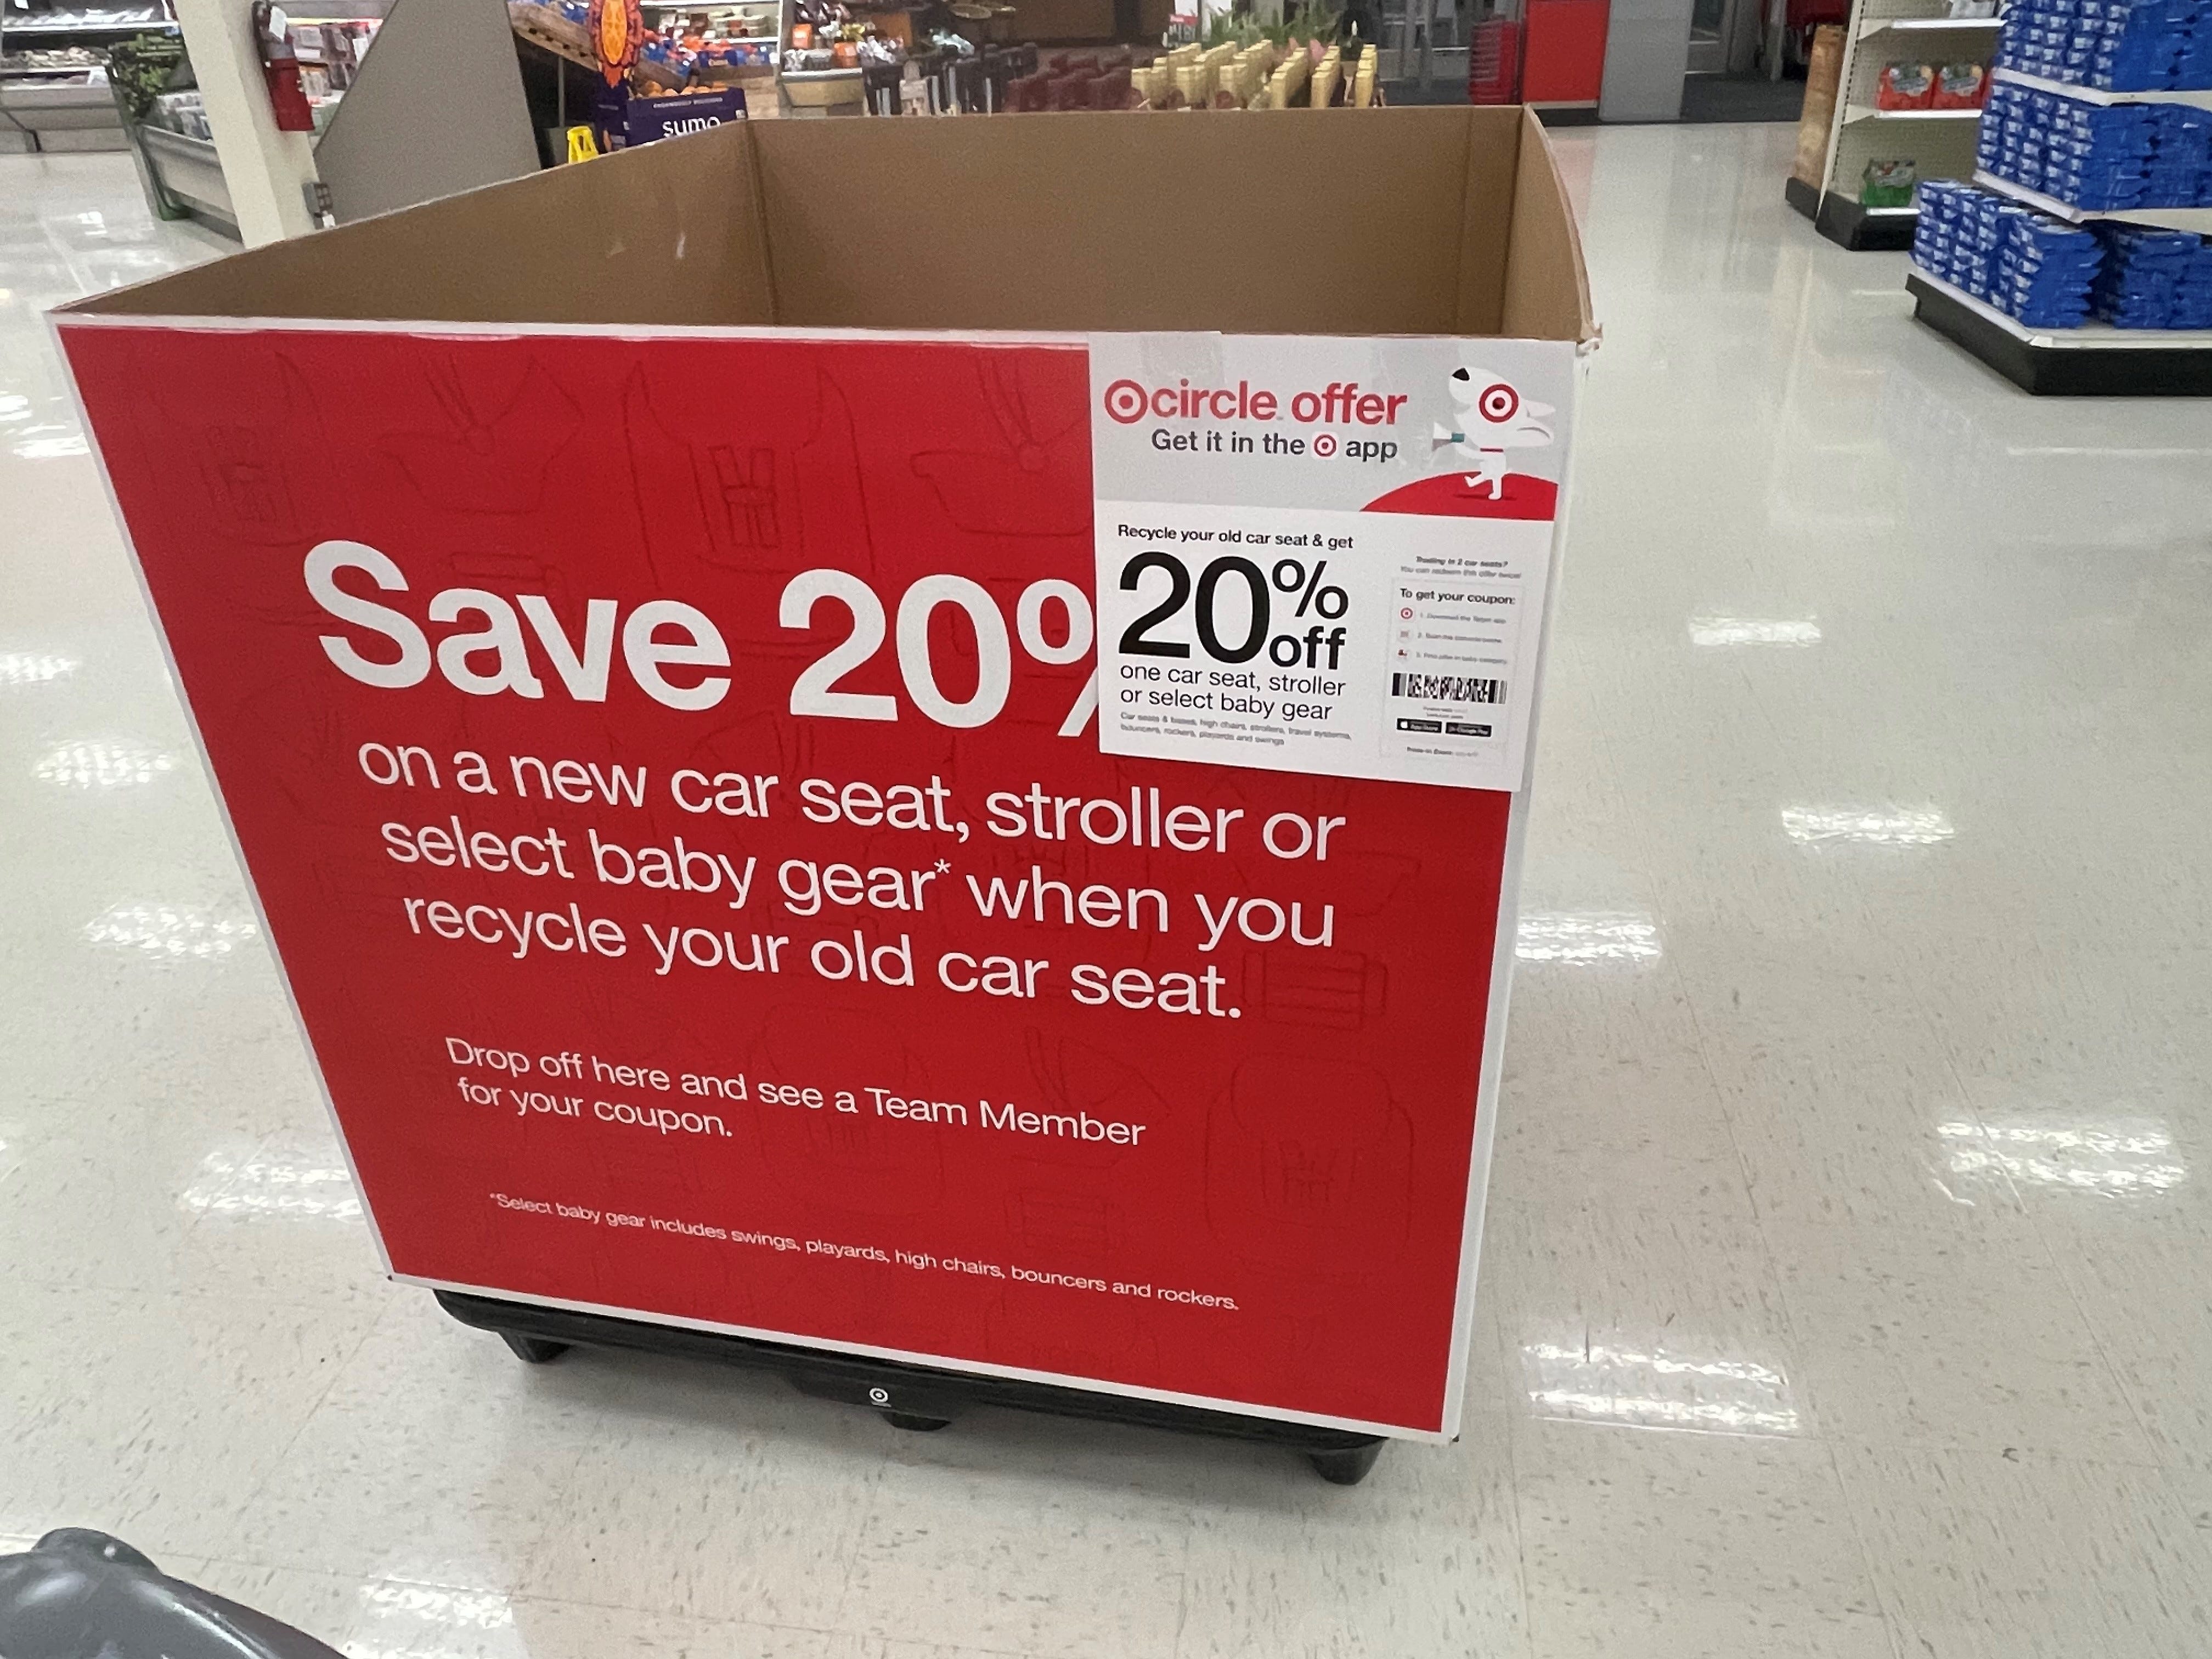 Target Car Seat Trade In 2021 Get 20, Where To Recycle Car Seats 2021